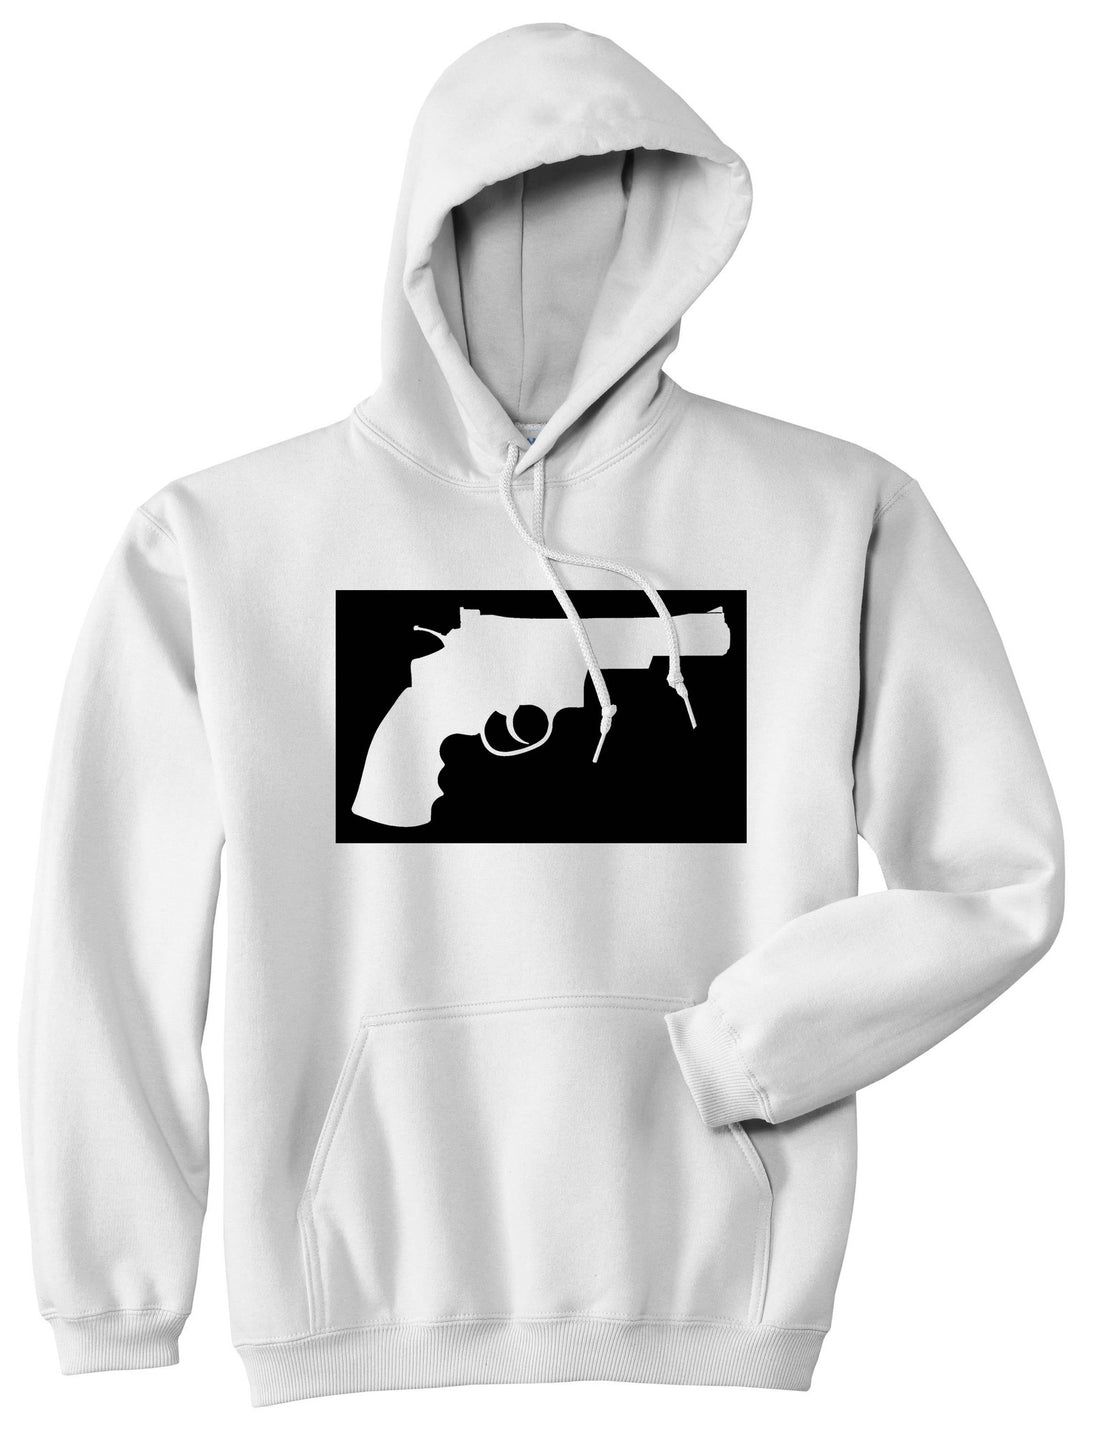 Gun Silhouette Revolver 45 Chrome Boys Kids Pullover Hoodie Hoody in White By Kings Of NY